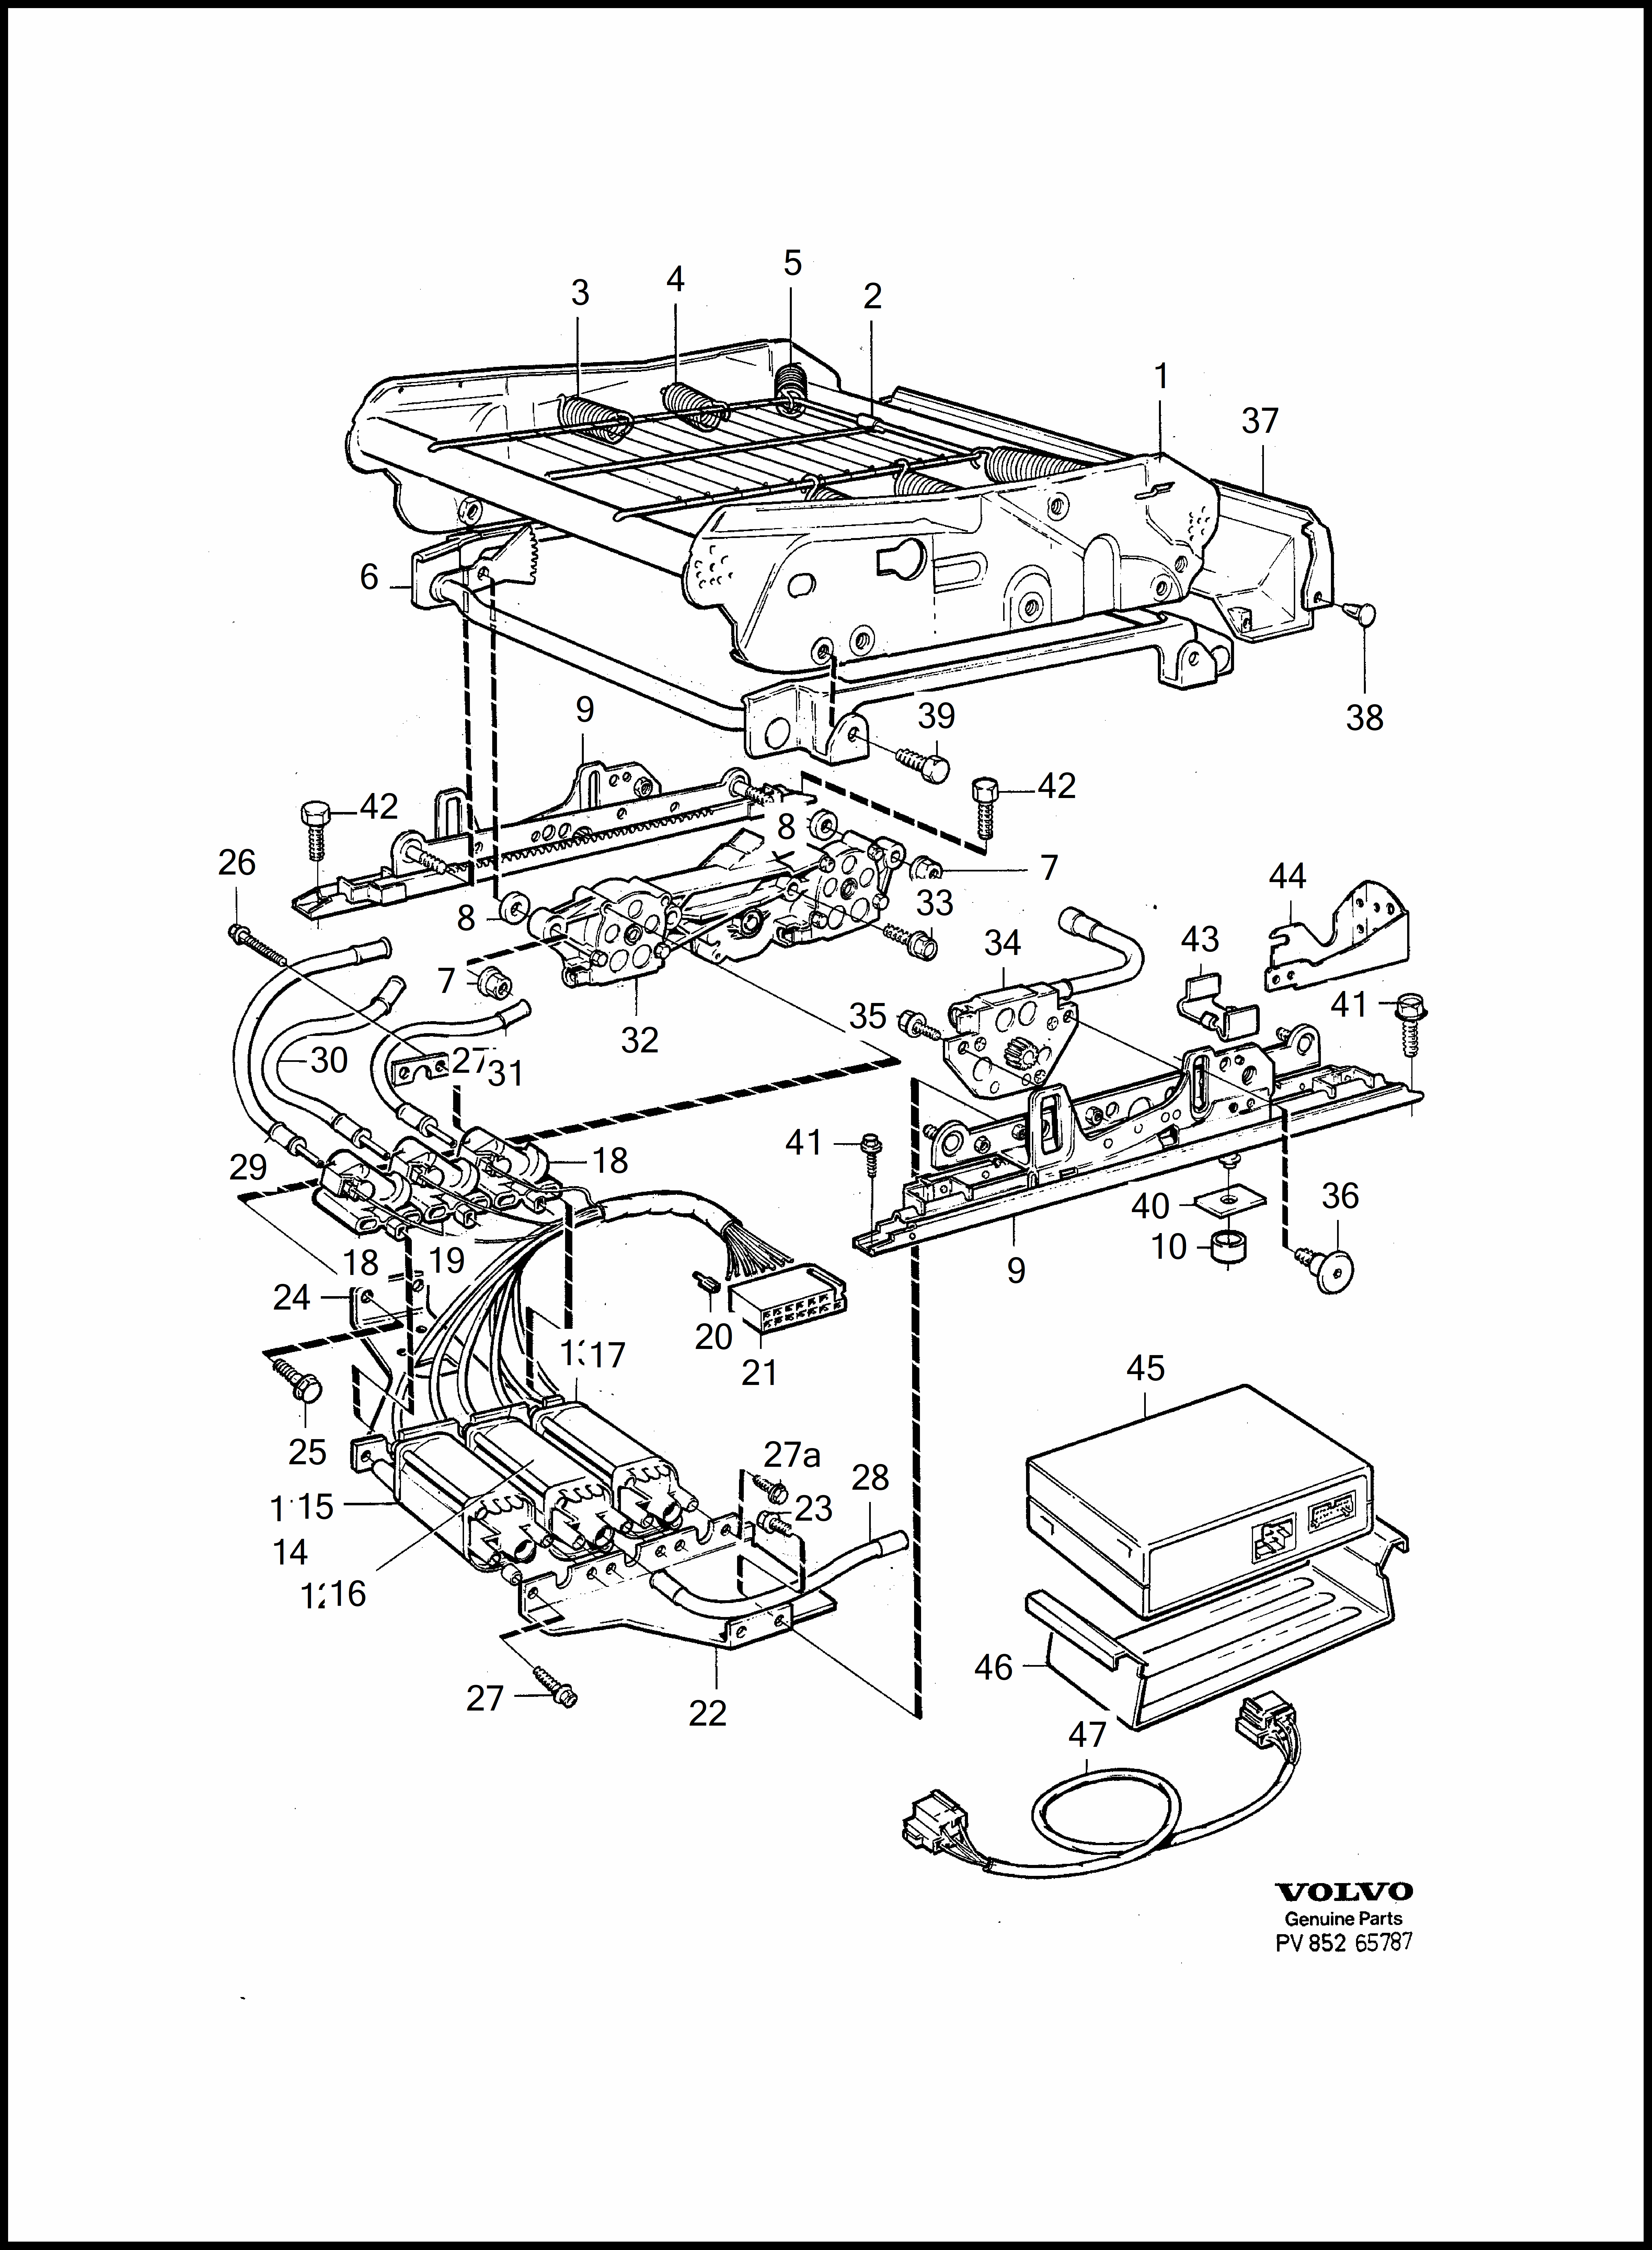 subframe for seat, electrical adjustment for Volvo 960 960